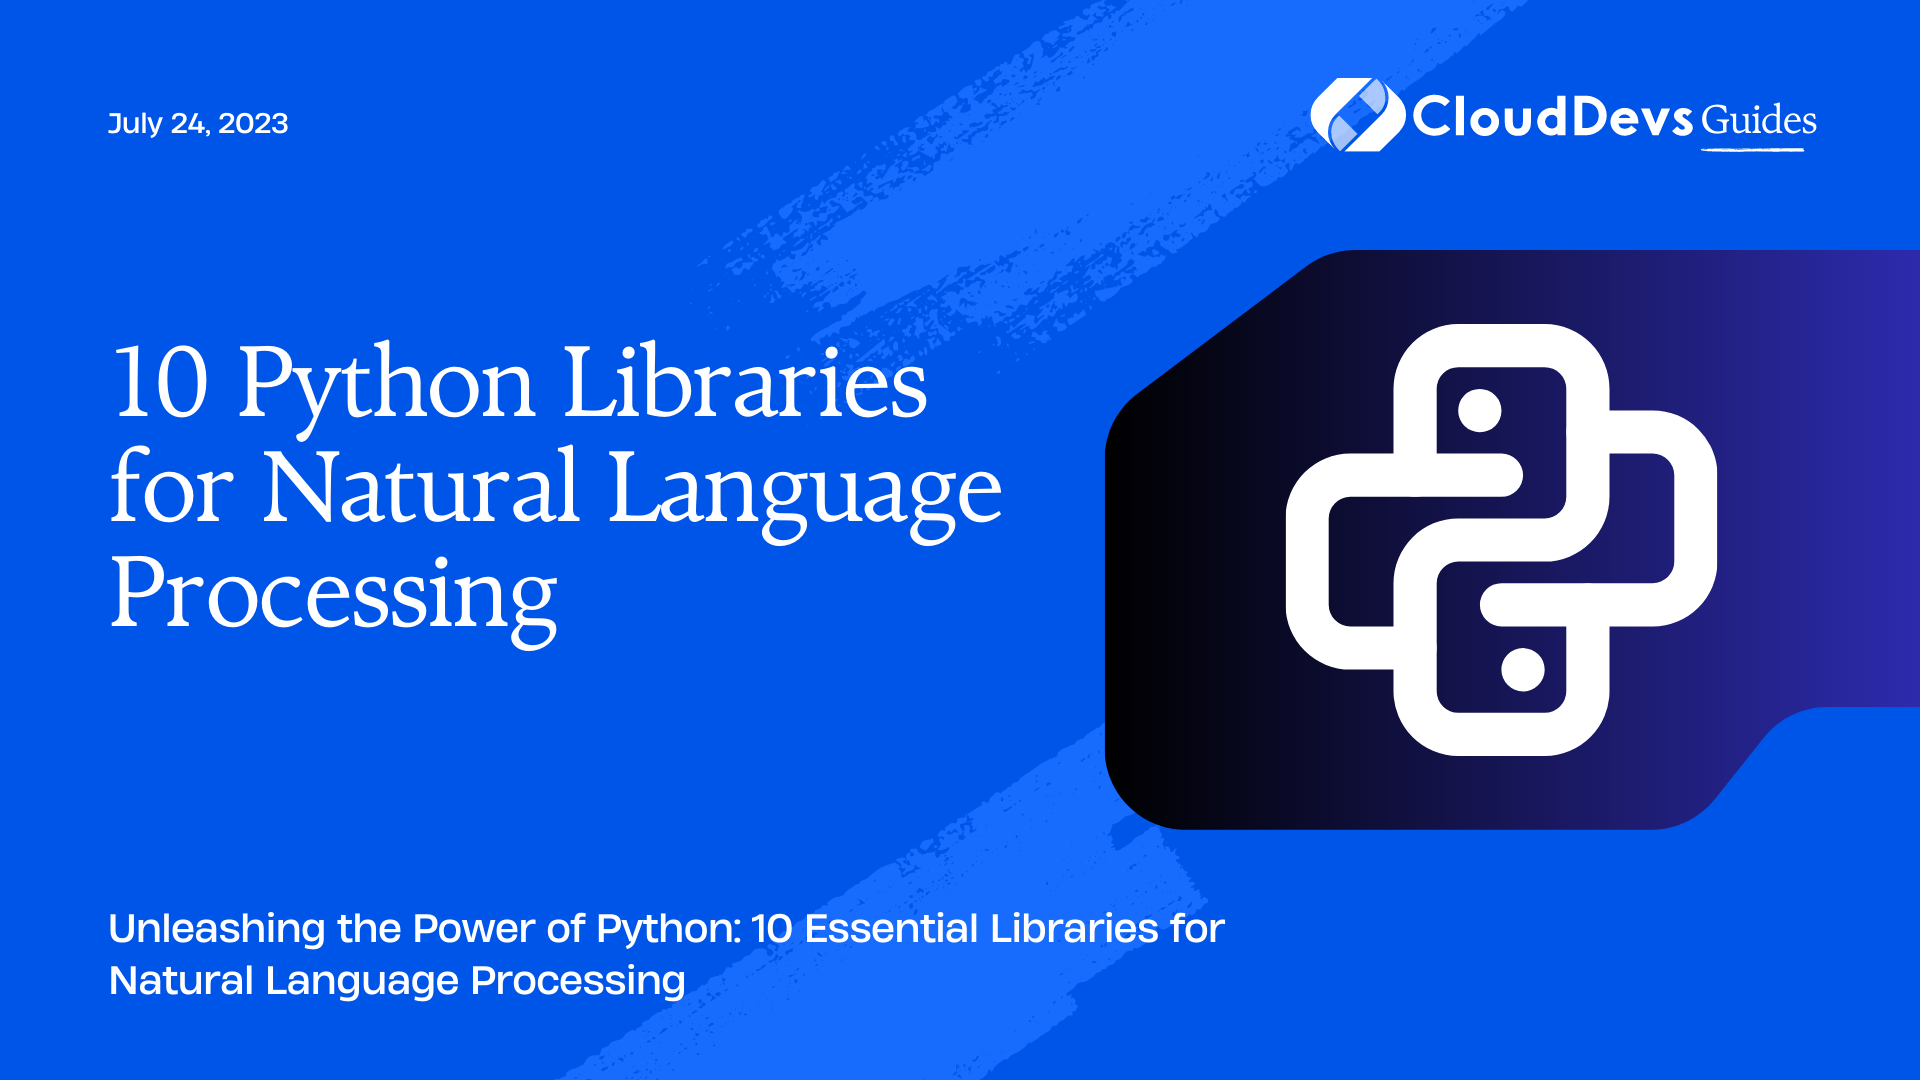 10 Python Libraries for Natural Language Processing